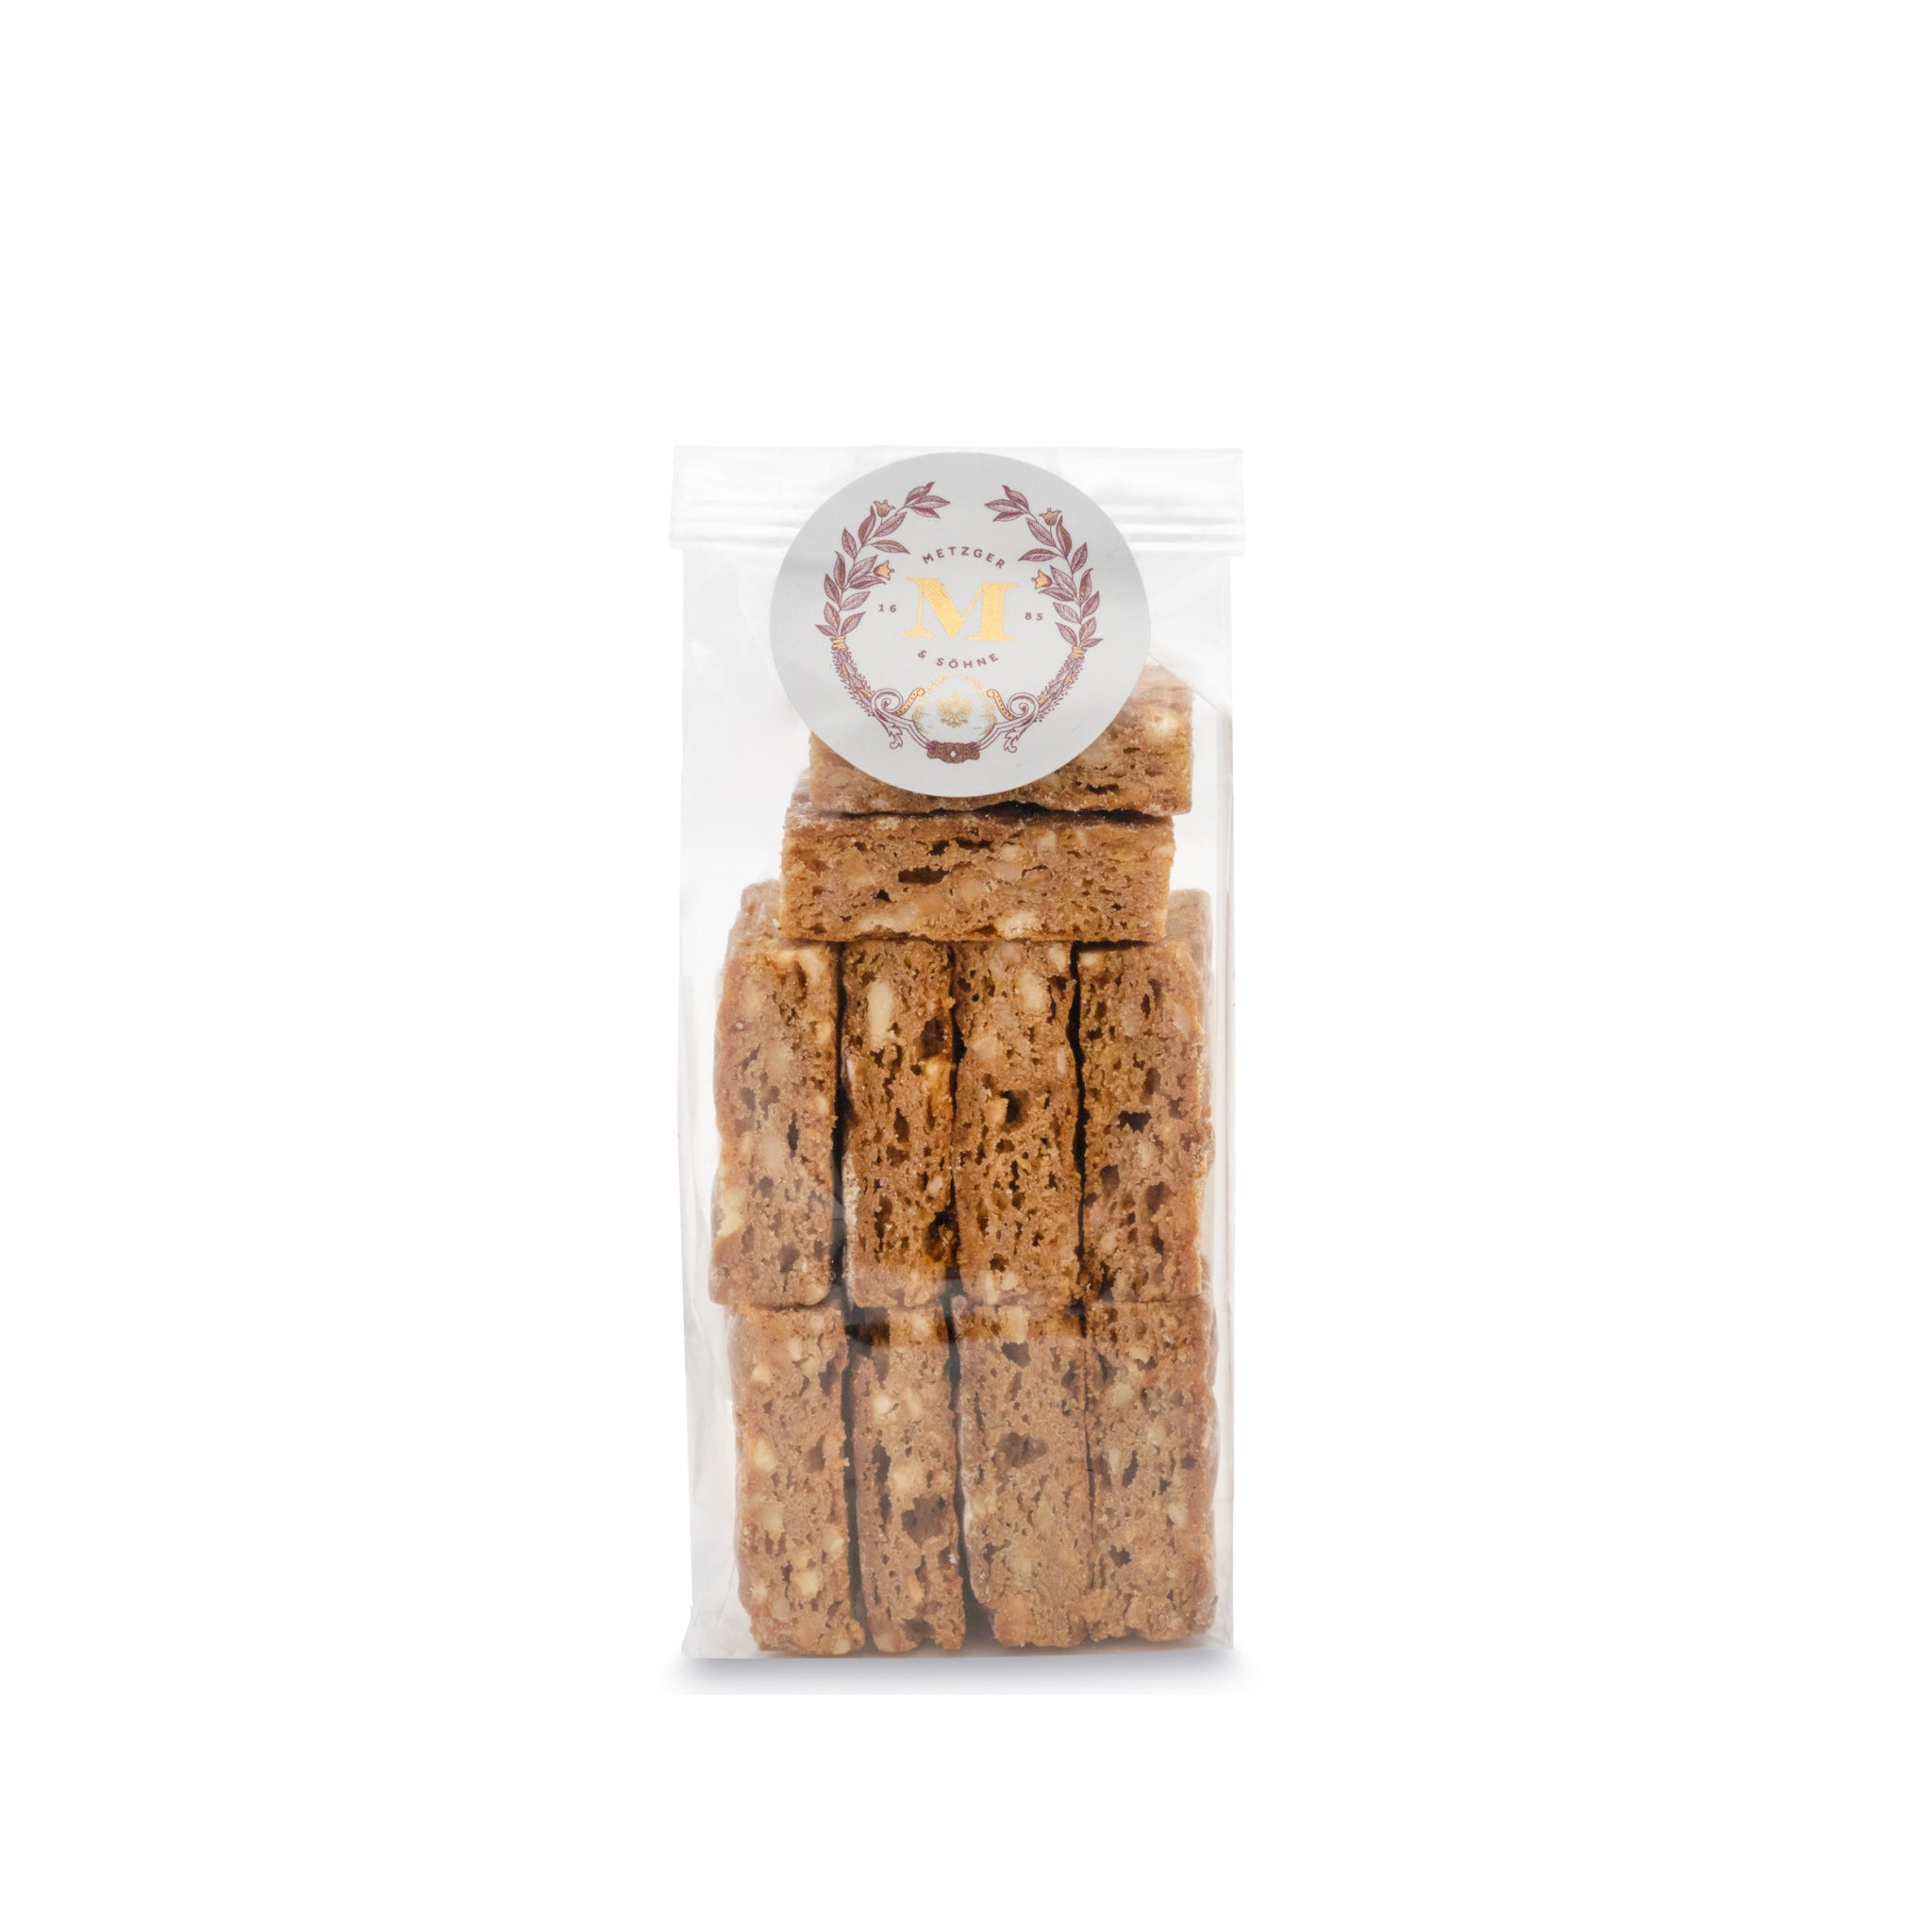 Scrumptious Lebkuchen cookies with coarsely grated hazelnuts, dried fruits and aranzini, with a slight cherry note. A real taste of Christmas is every bite. Metzger cookies are handcrafted using traditional recipes and high quality ingredients, including pure honey from Austria.